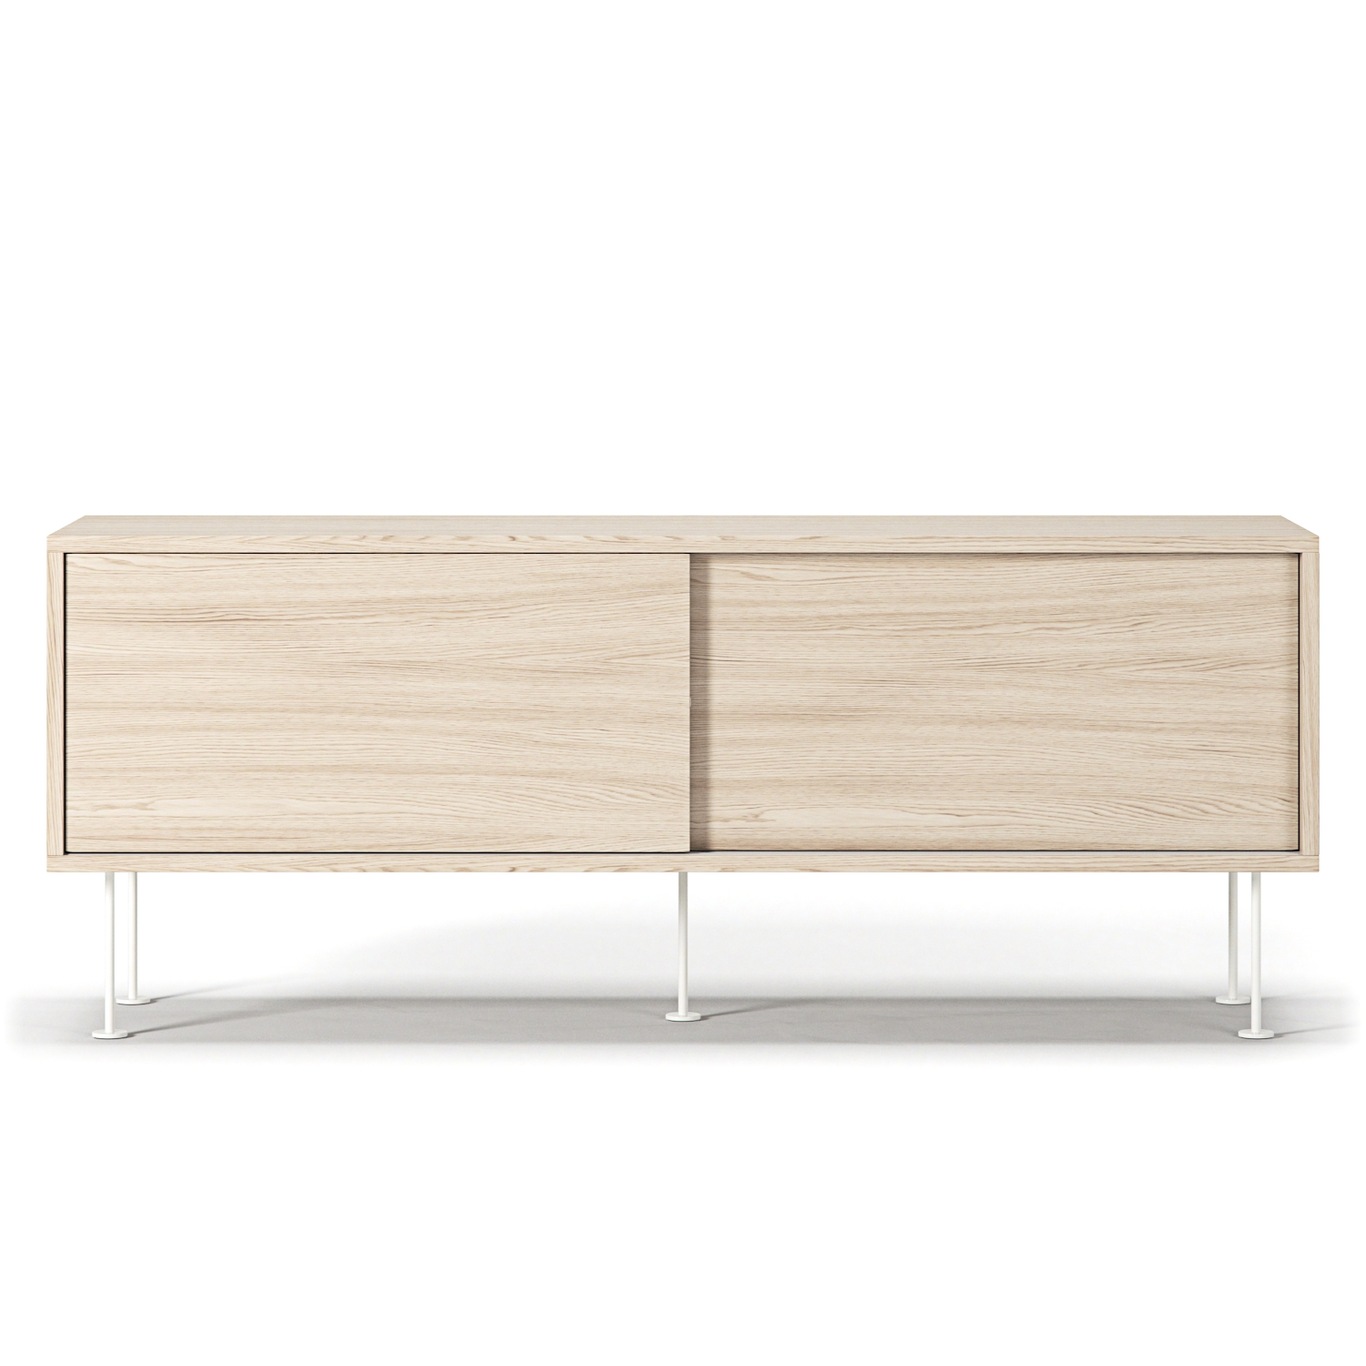 Vogue Media Bench With Legs 136 cm, White Pigmented Oak / White